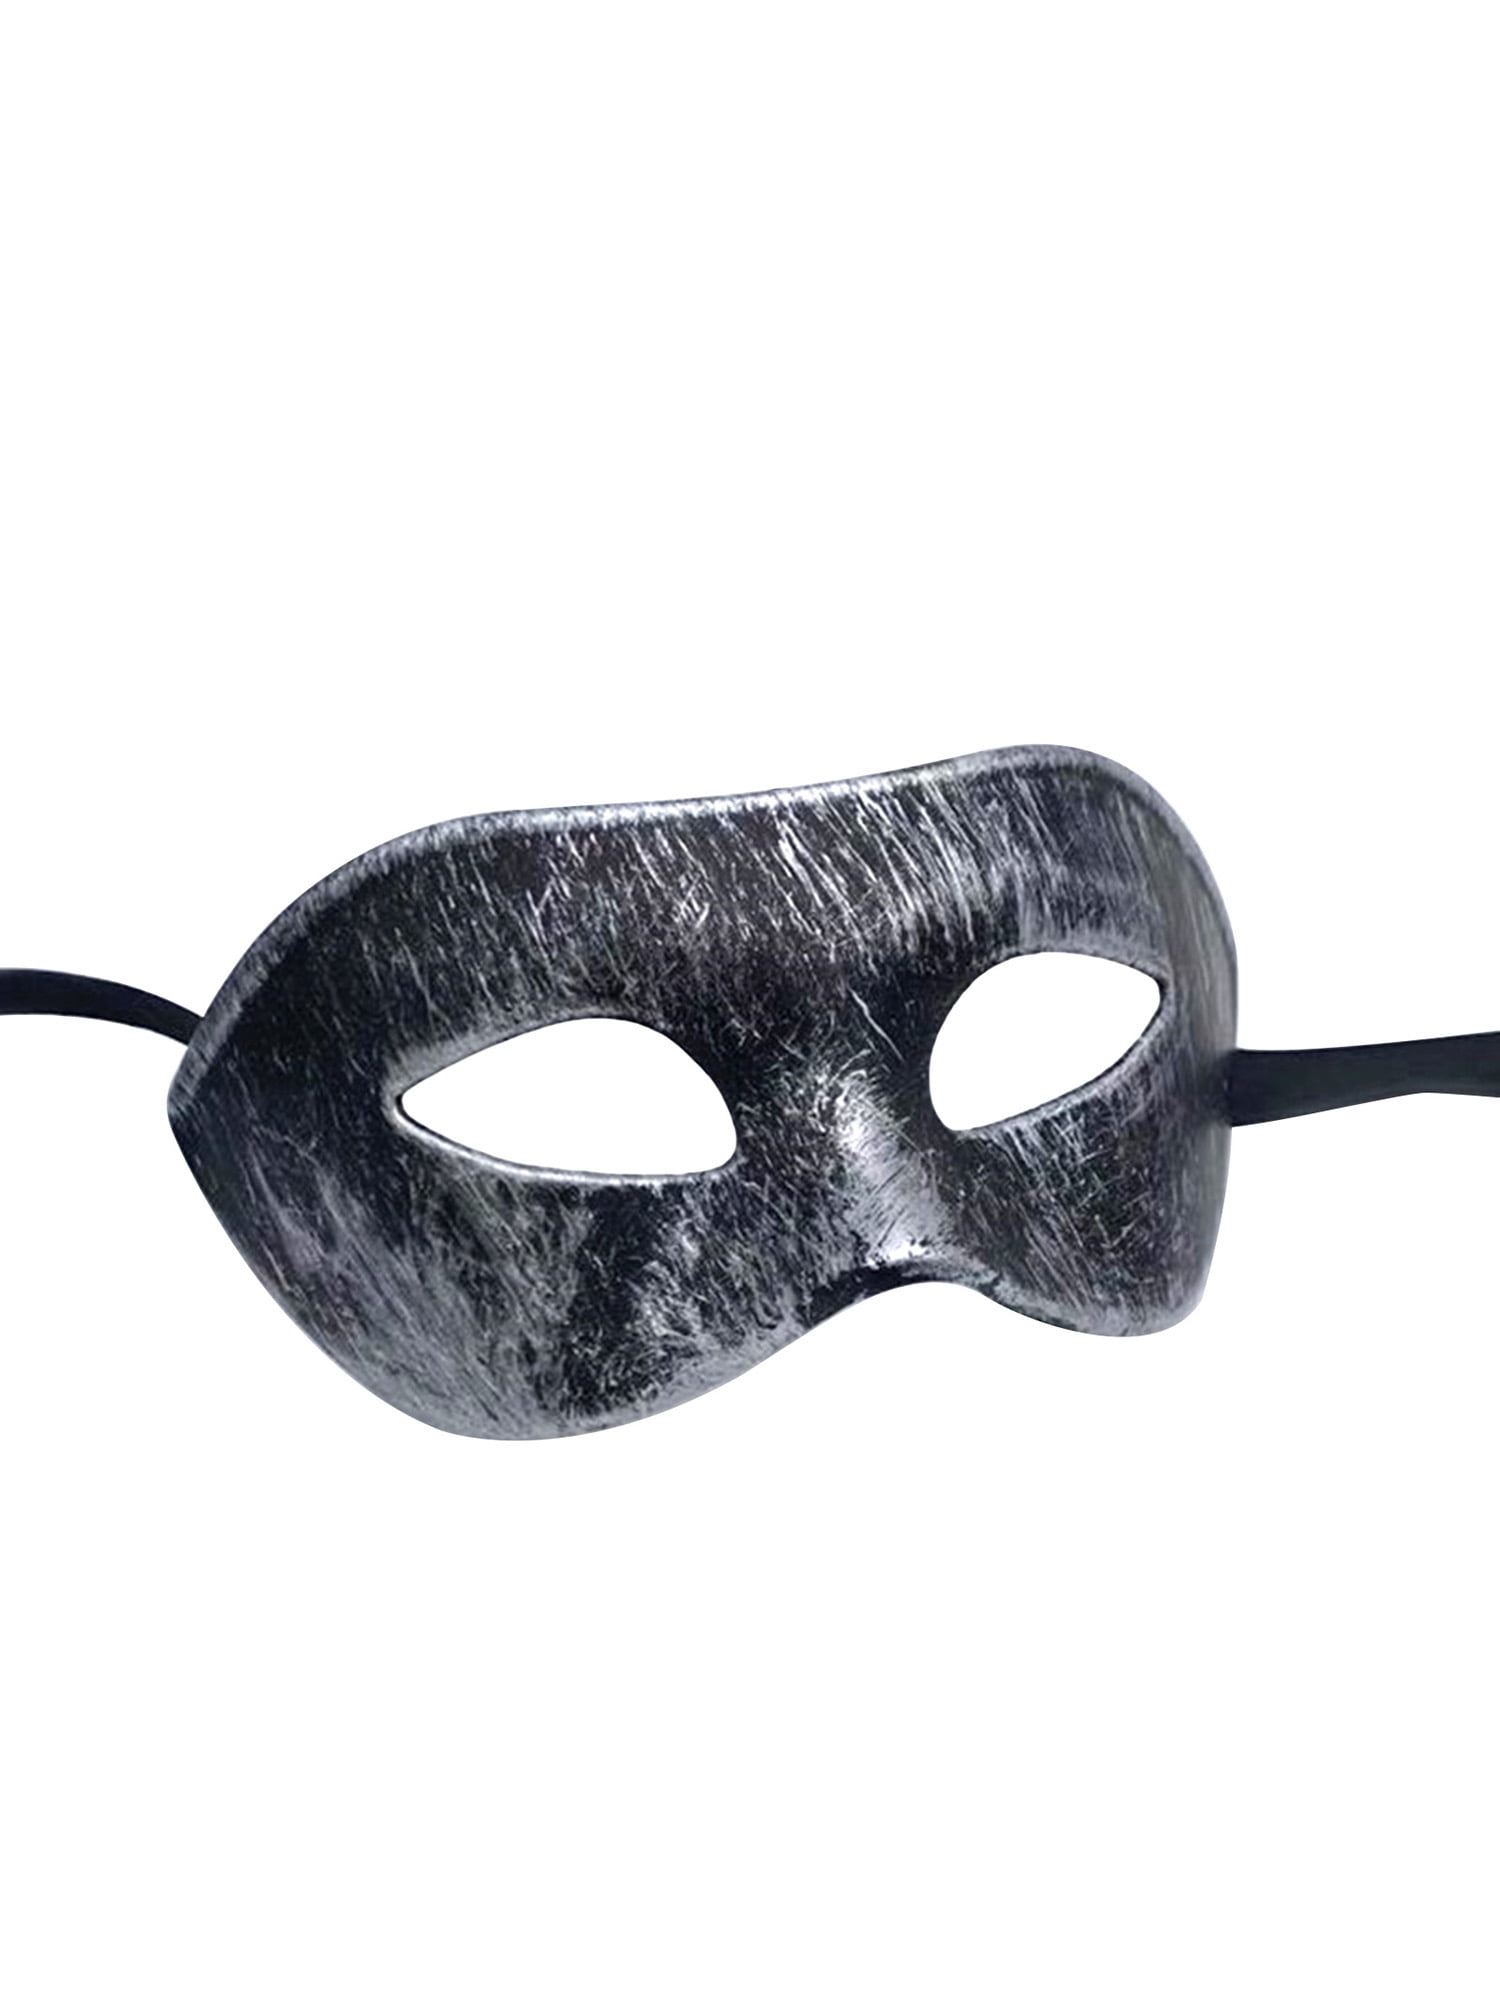 Men Carnival Costume Props Halloween Masks Party Cosplay Props Half Face  Mask Prom Party Supplies – the best products in the Joom Geek online store